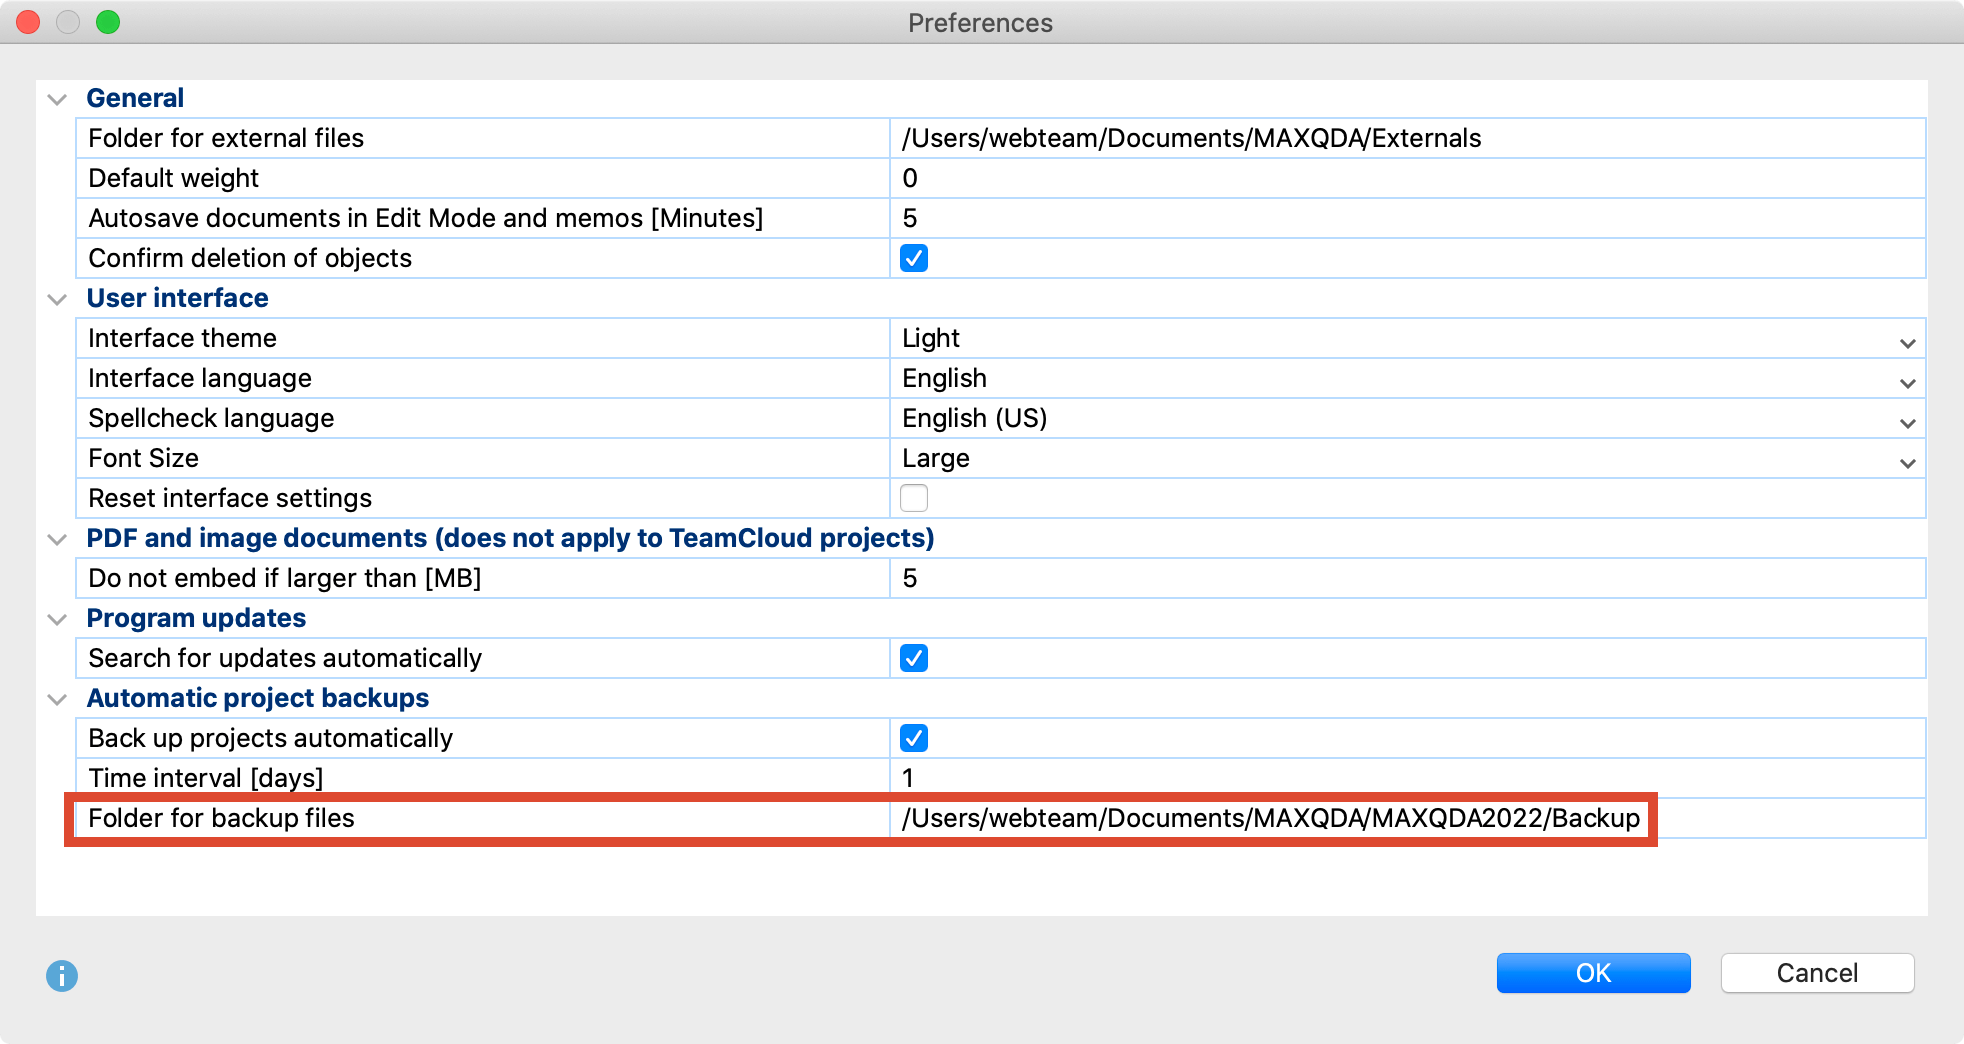 Define the settings for the automatic backup of projects